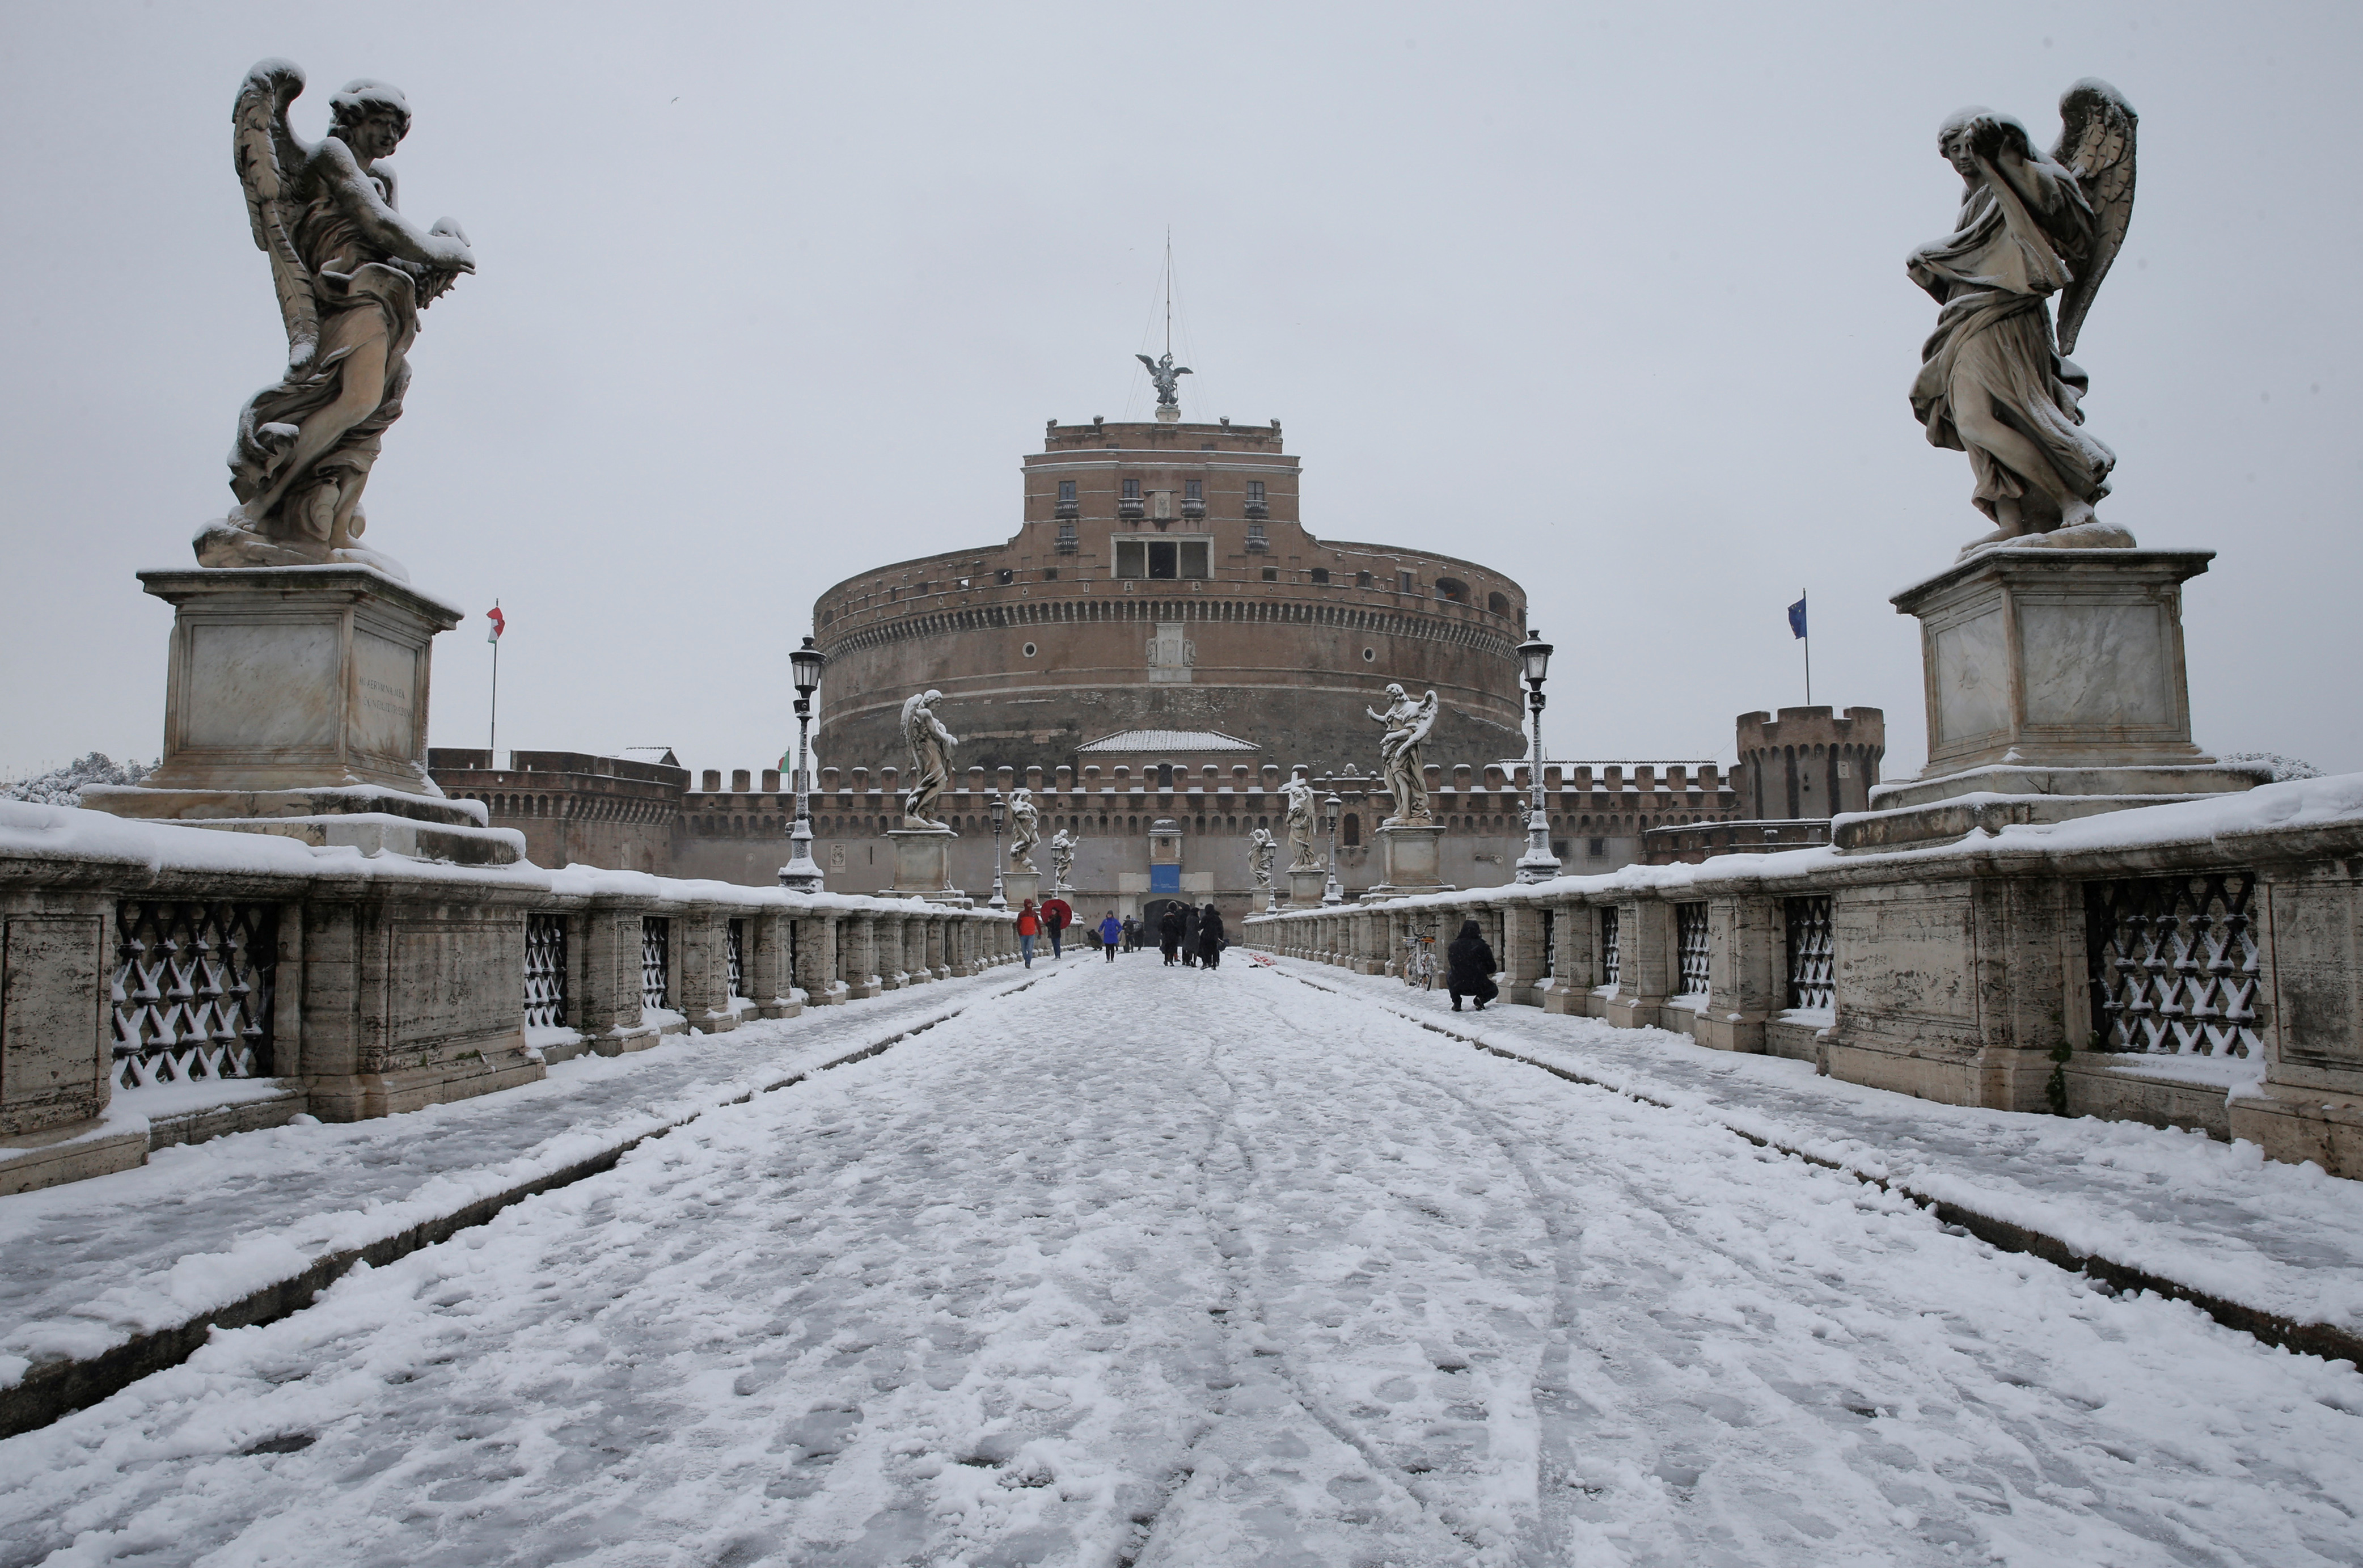 Saint Angelo Castle is seen during a heavy snowfall in downtown Rome, Italy February 26, 2018. REUTERS/Max Rossi